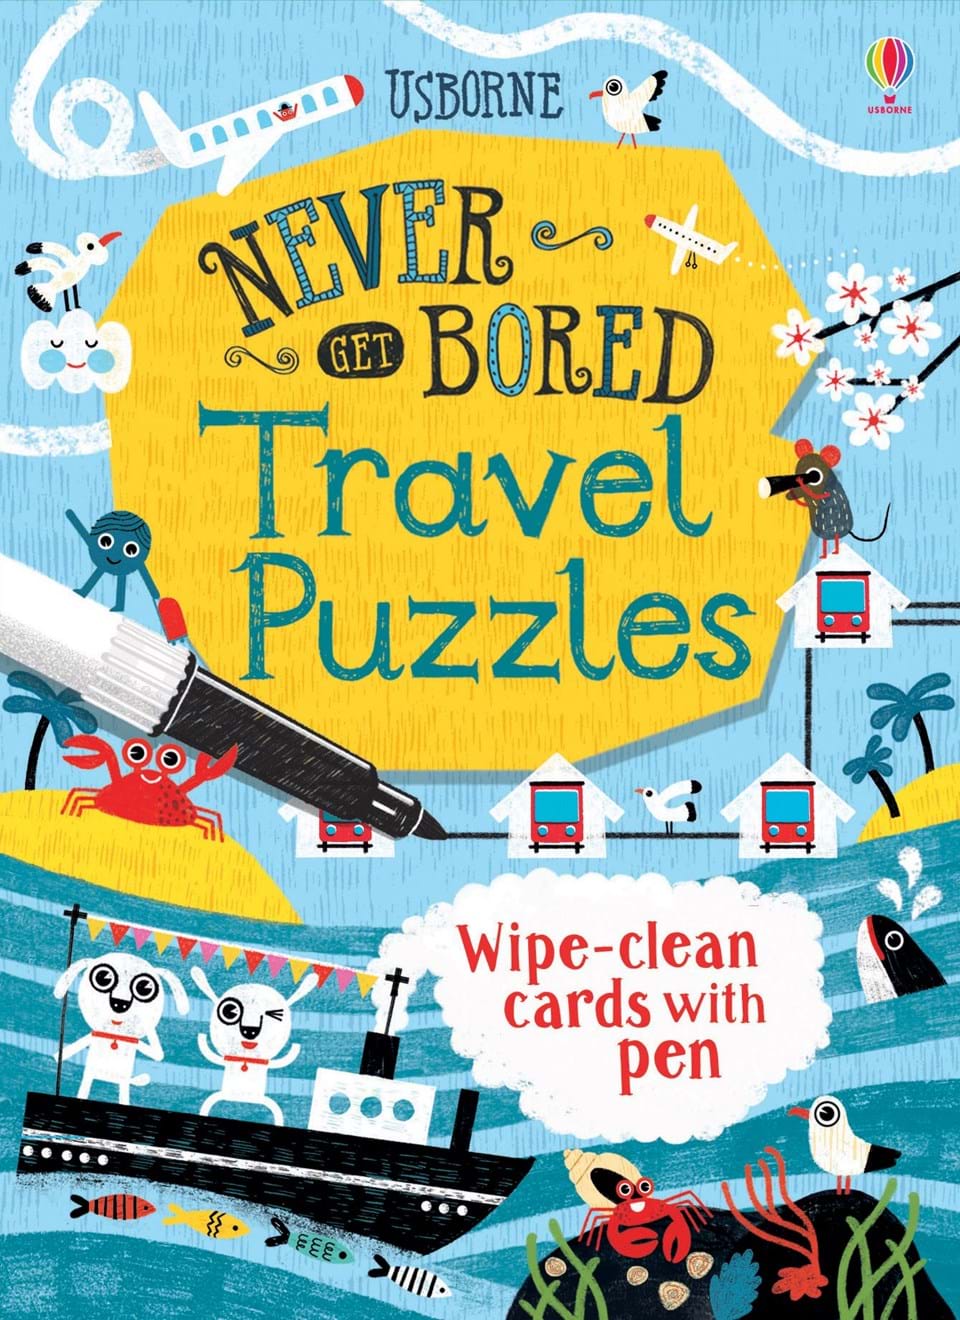 Never get bored - Travel puzzles